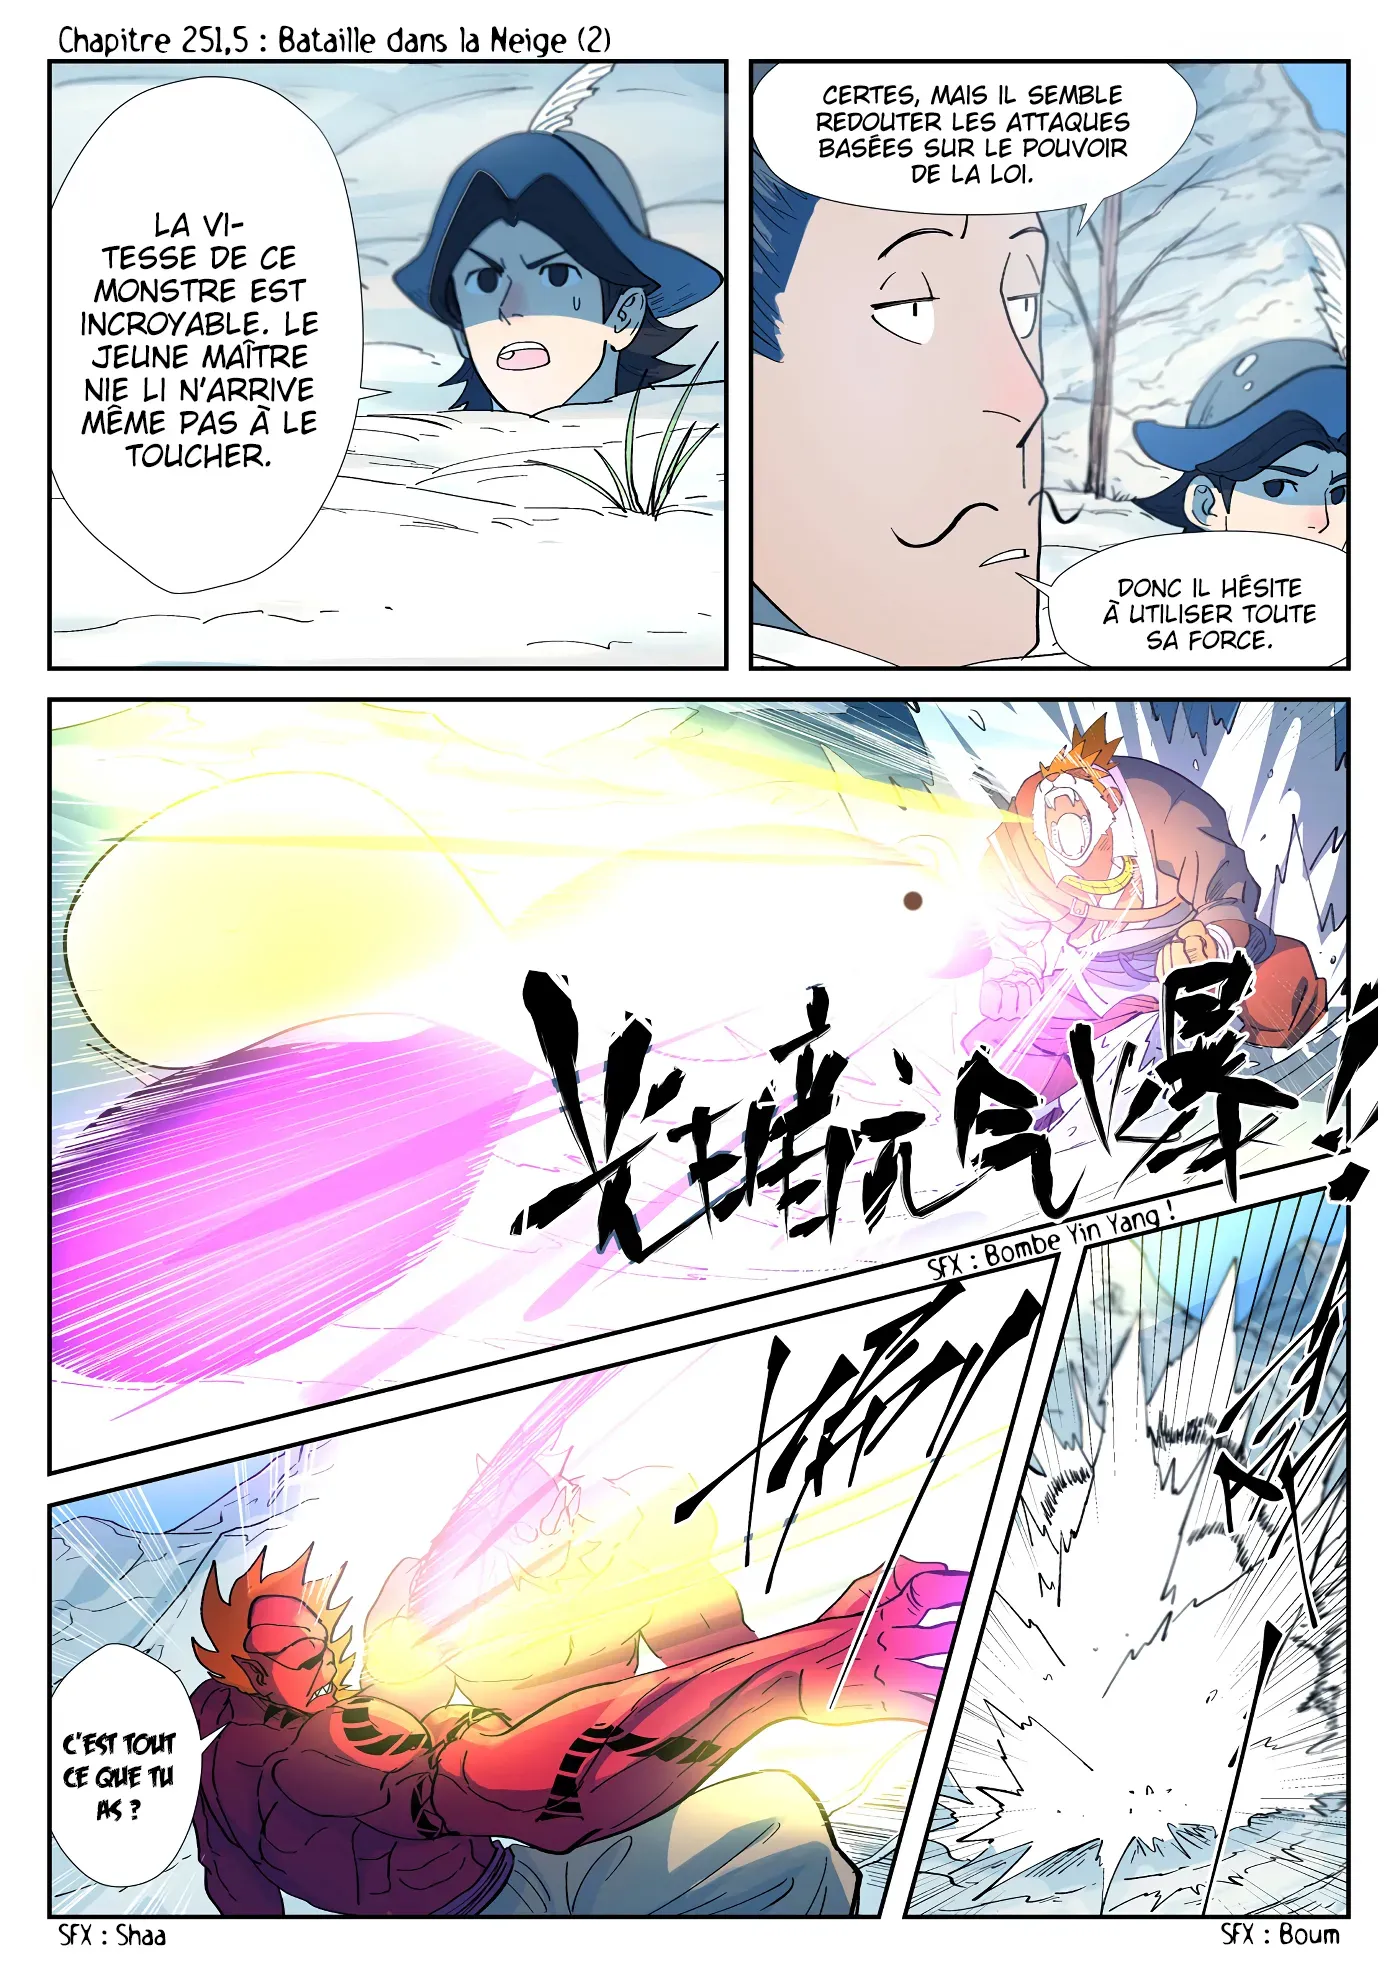 Tales Of Demons And Gods: Chapter chapitre-251.5 - Page 1